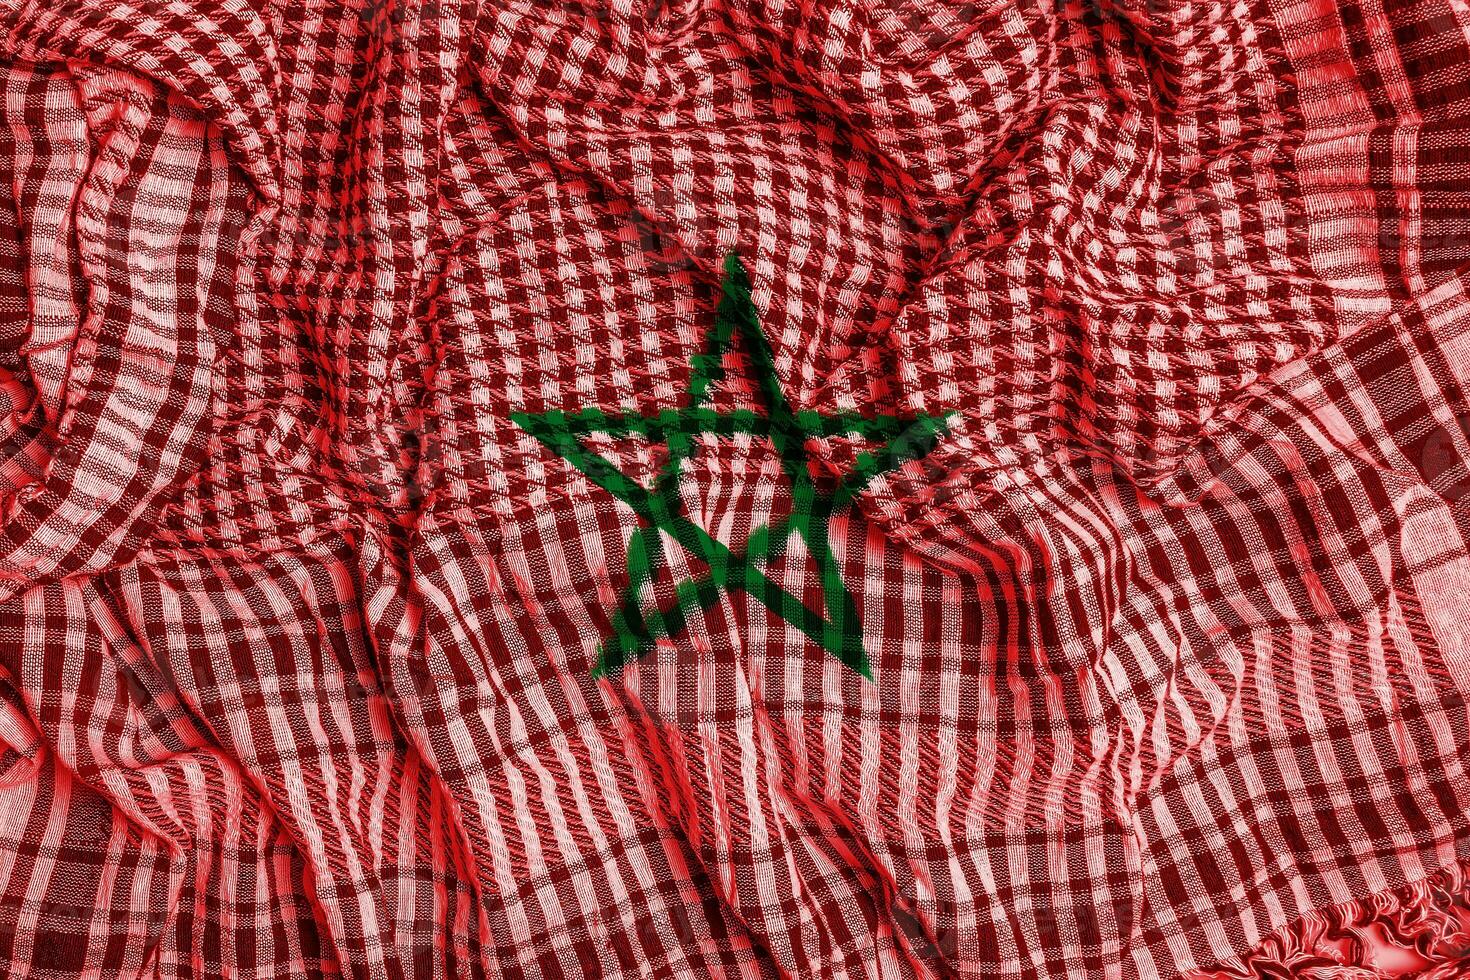 Flag of Kingdom of Morocco on a textured background. Concept collage. photo